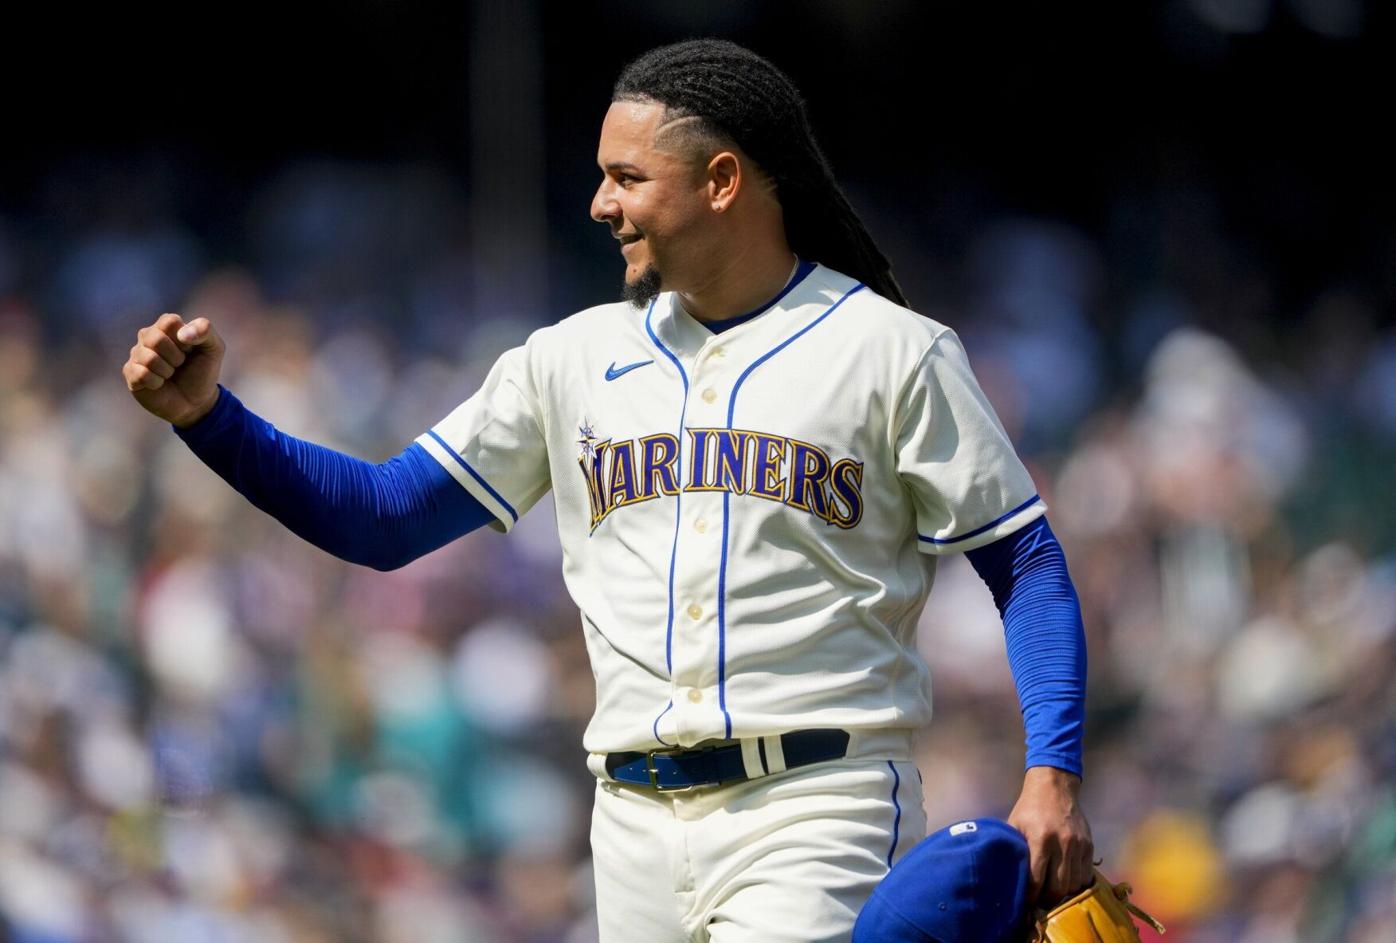 Seattle Mariners' Julio Rodriguez smiles as he answers questions